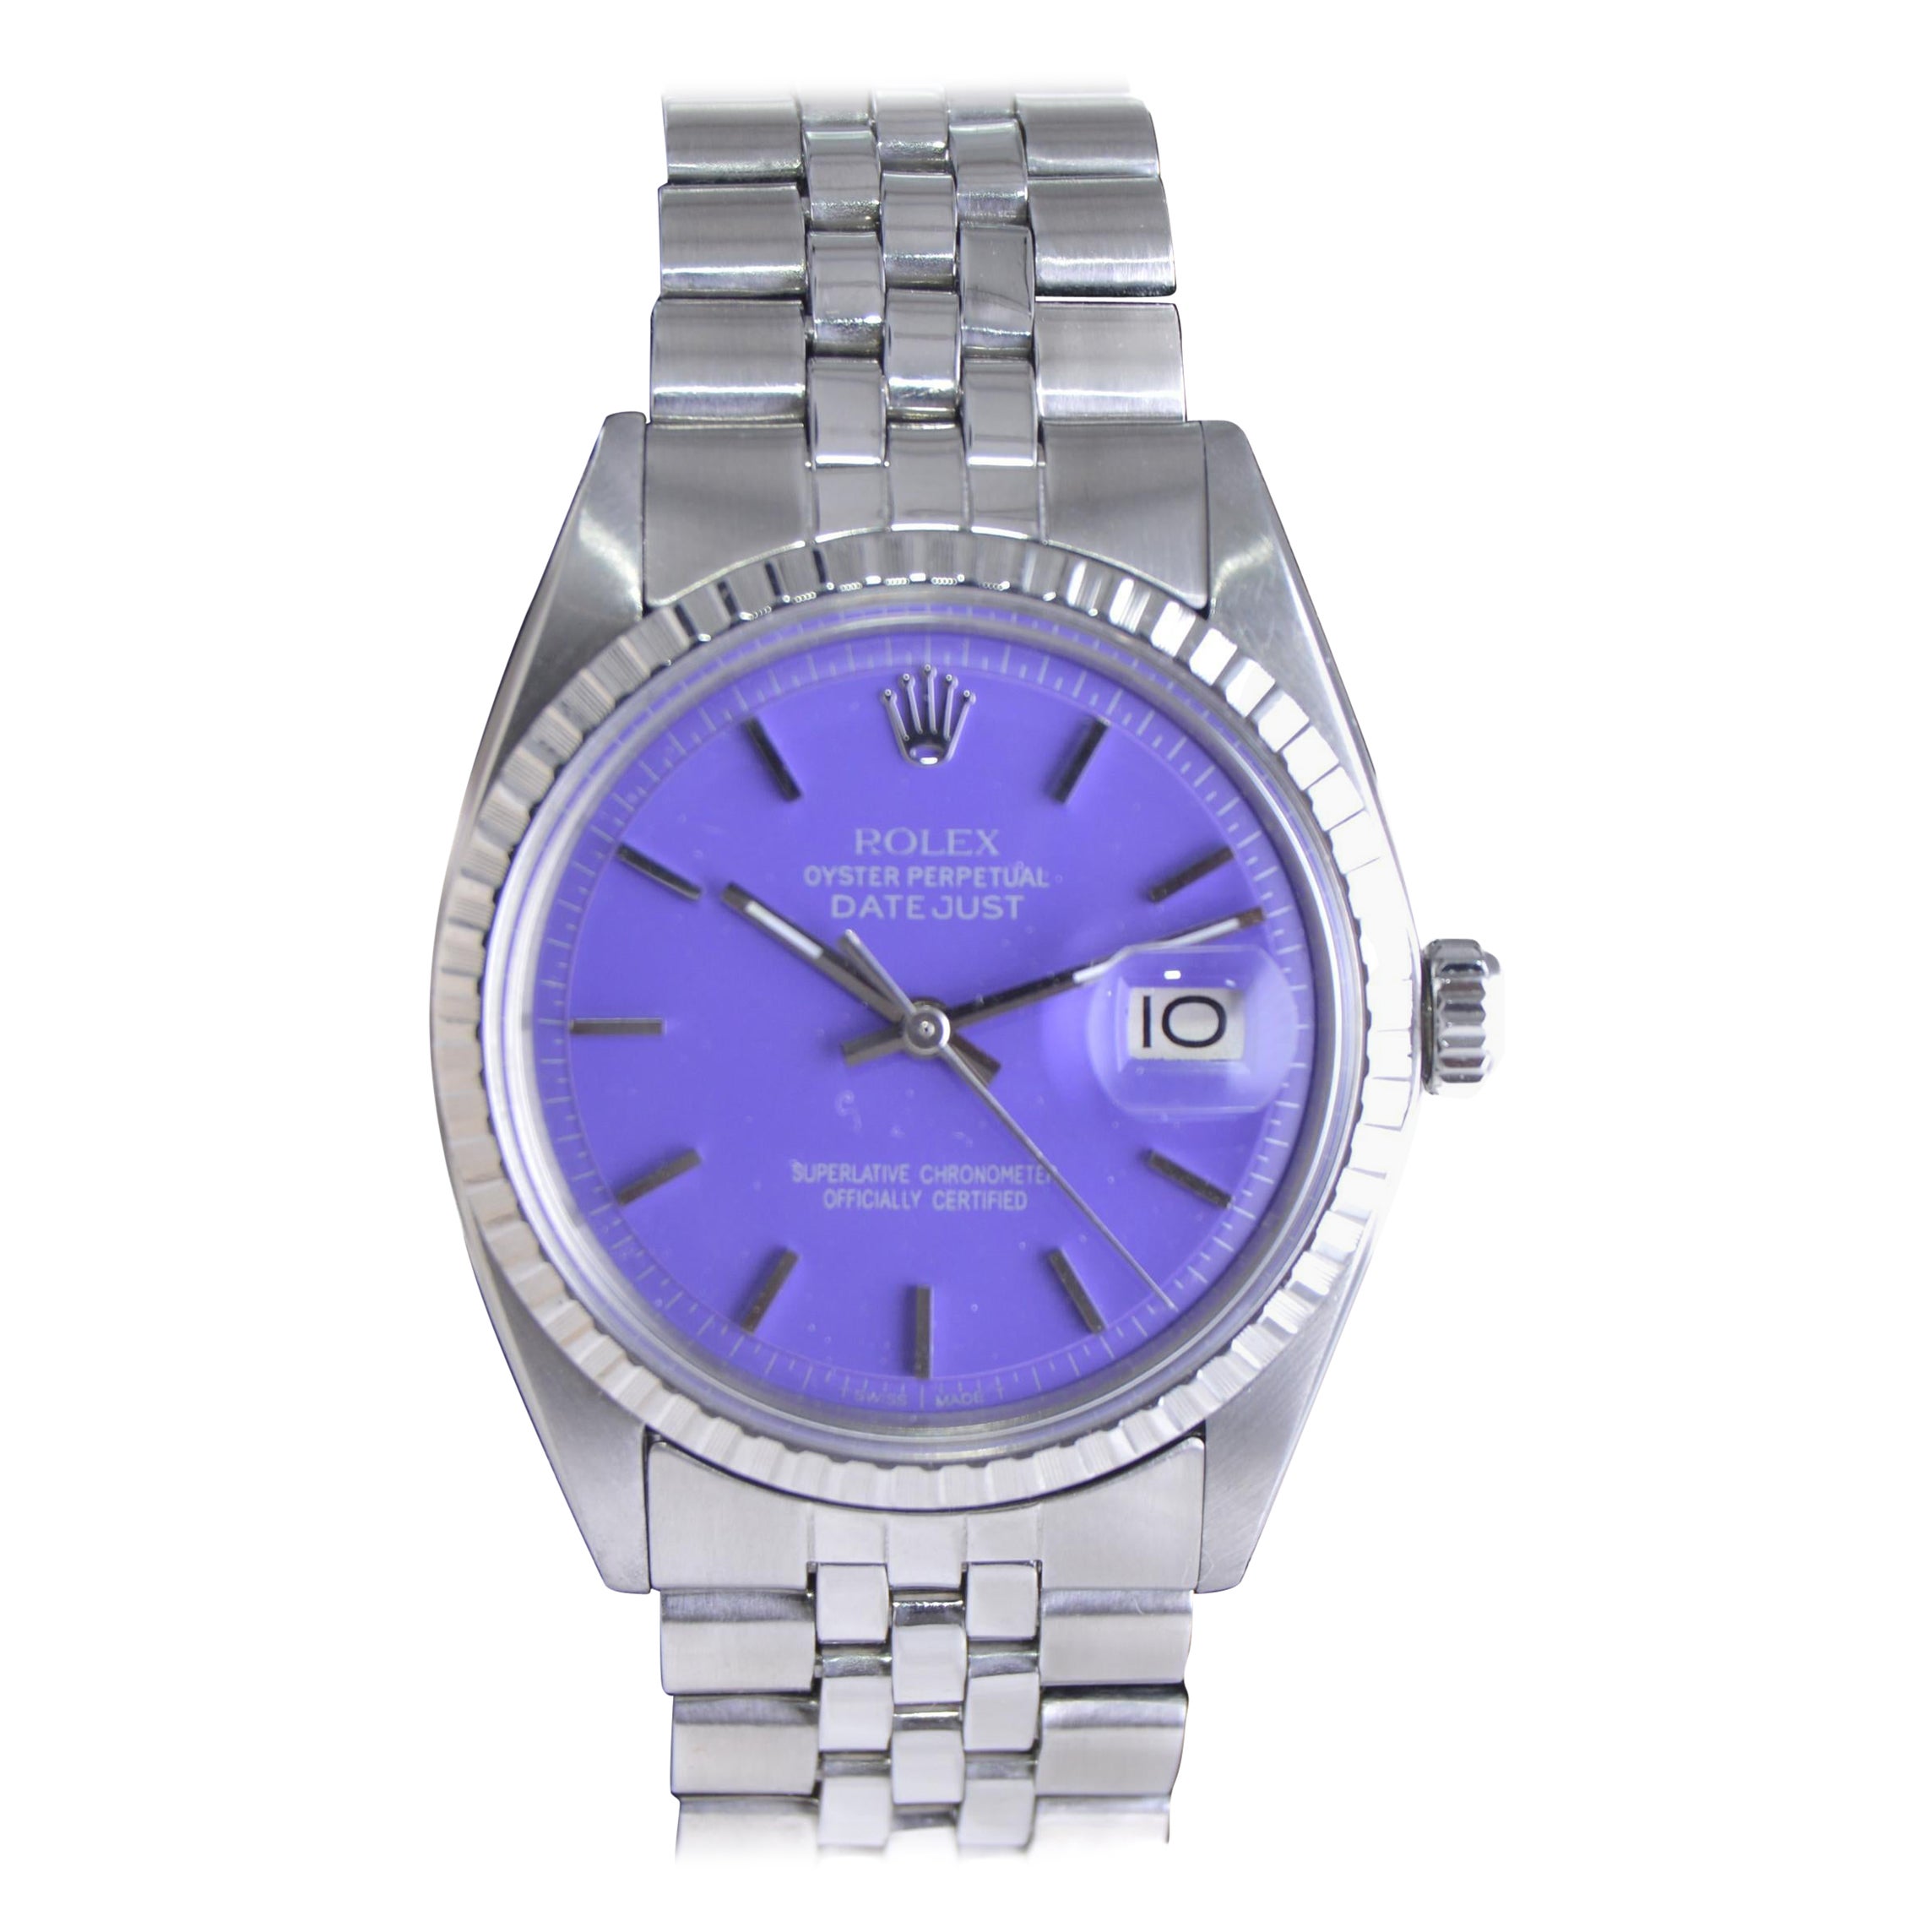 Rolex Steel Datejust with Custom Finished Purple Dial 1960s